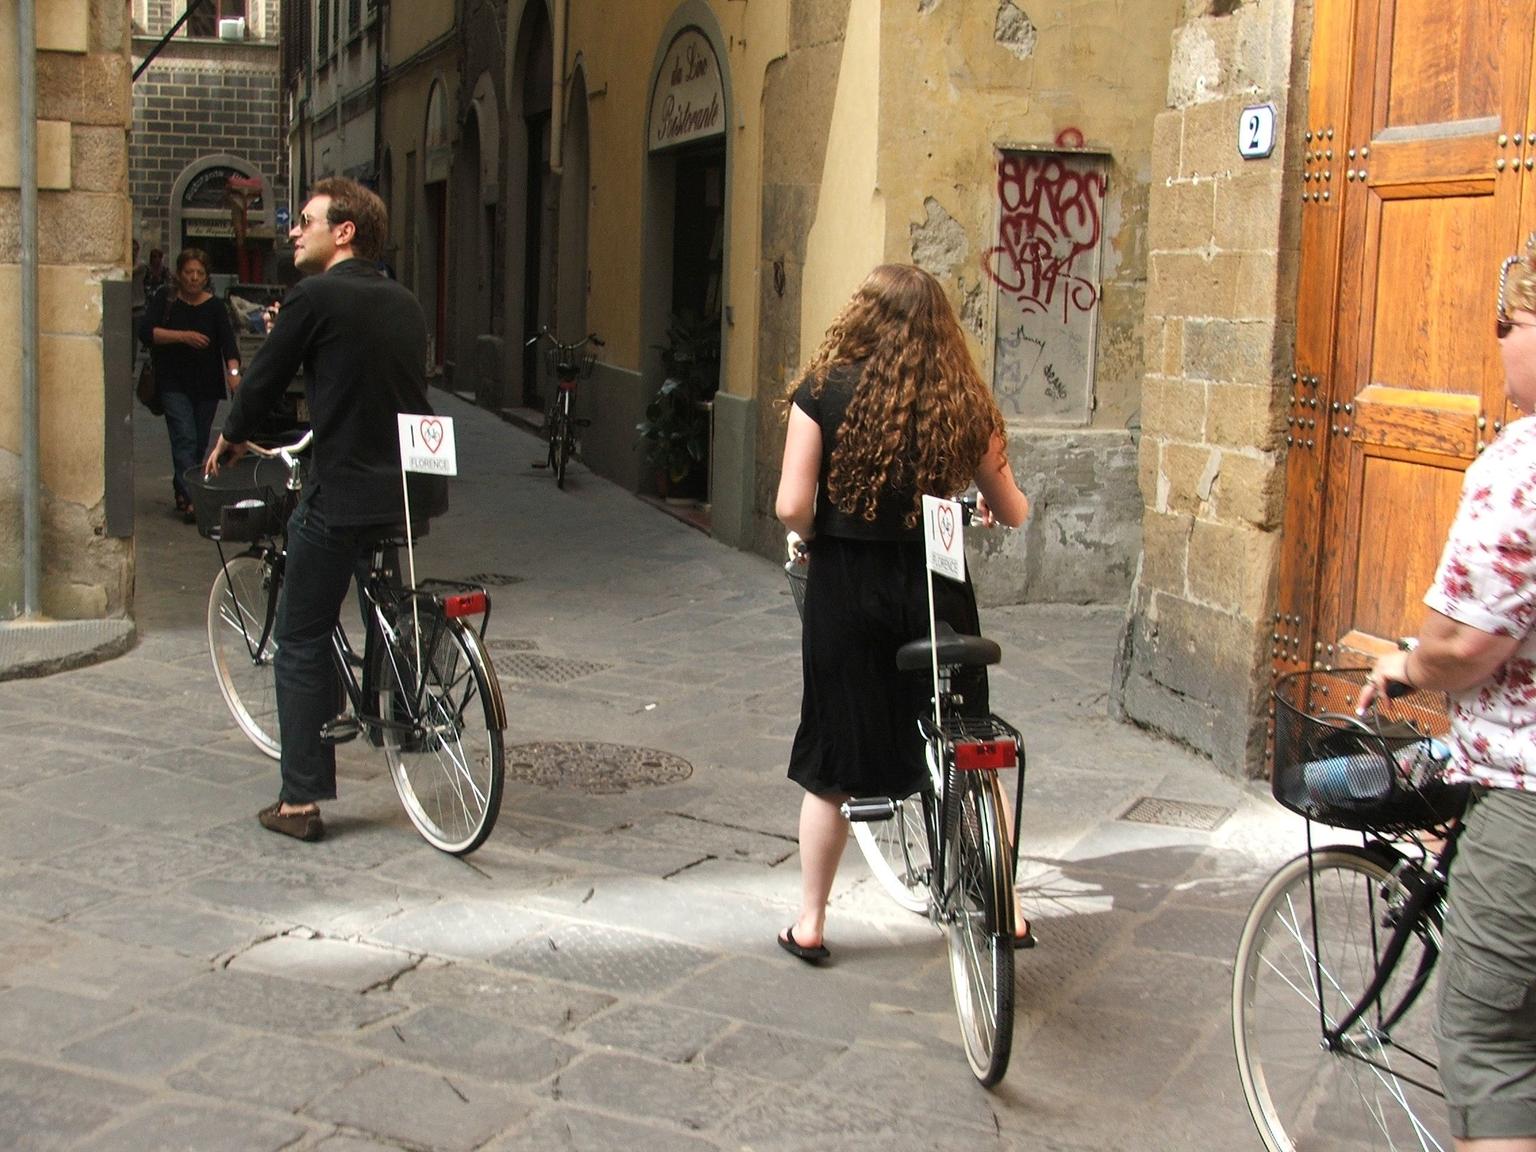 Riding a bike in Florence was beautiful